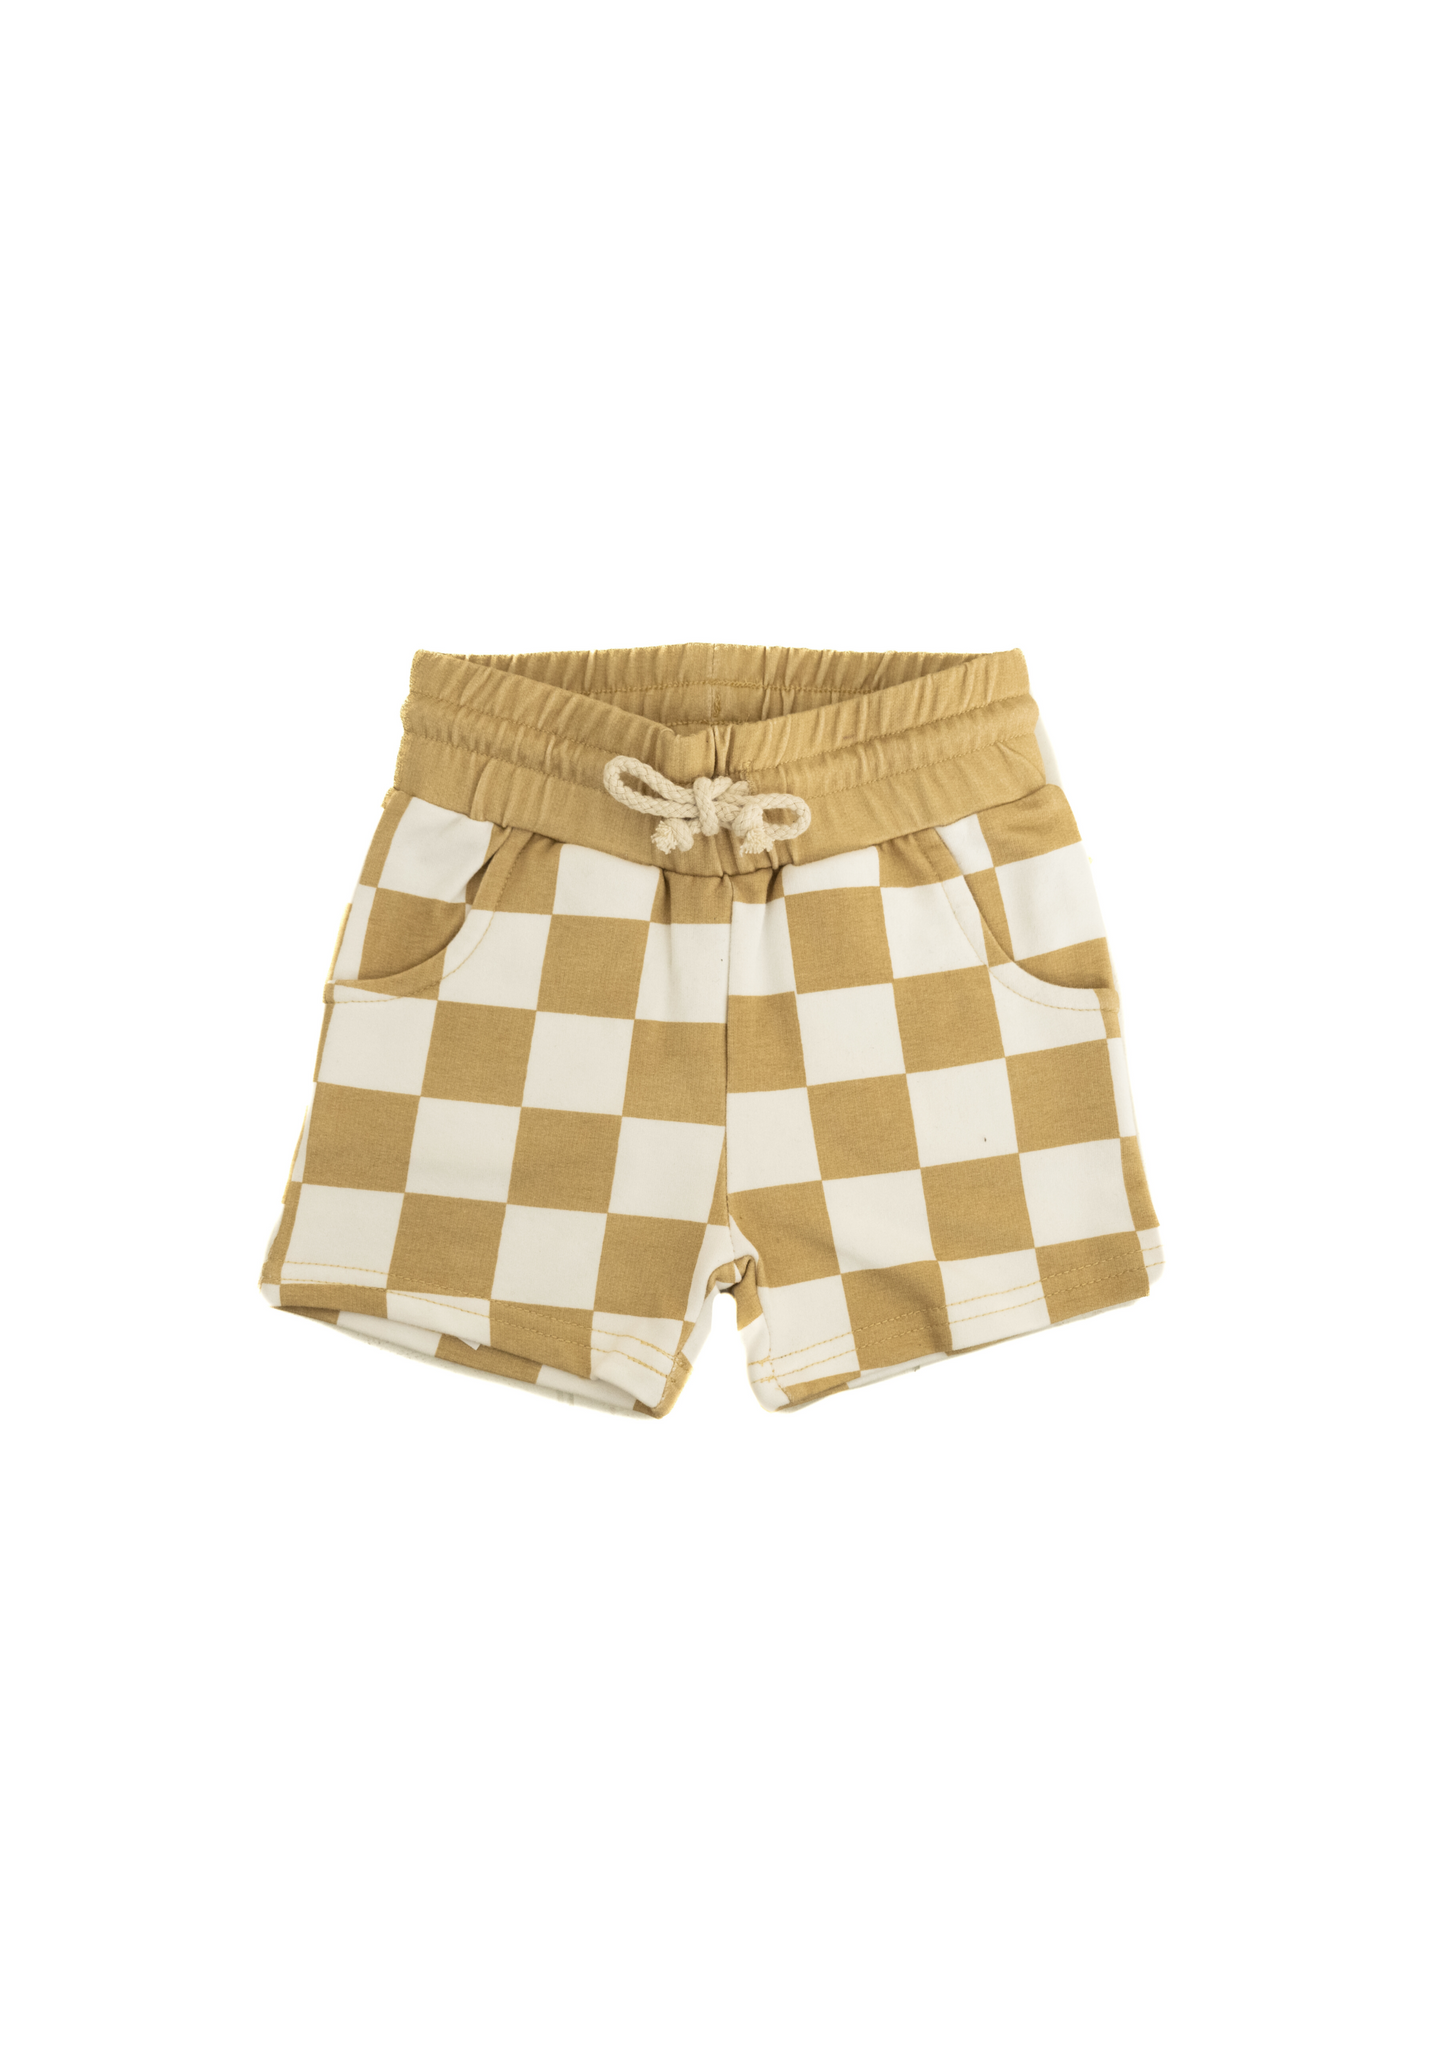 CHECK ULTIMATE SHORTS IN FLAX